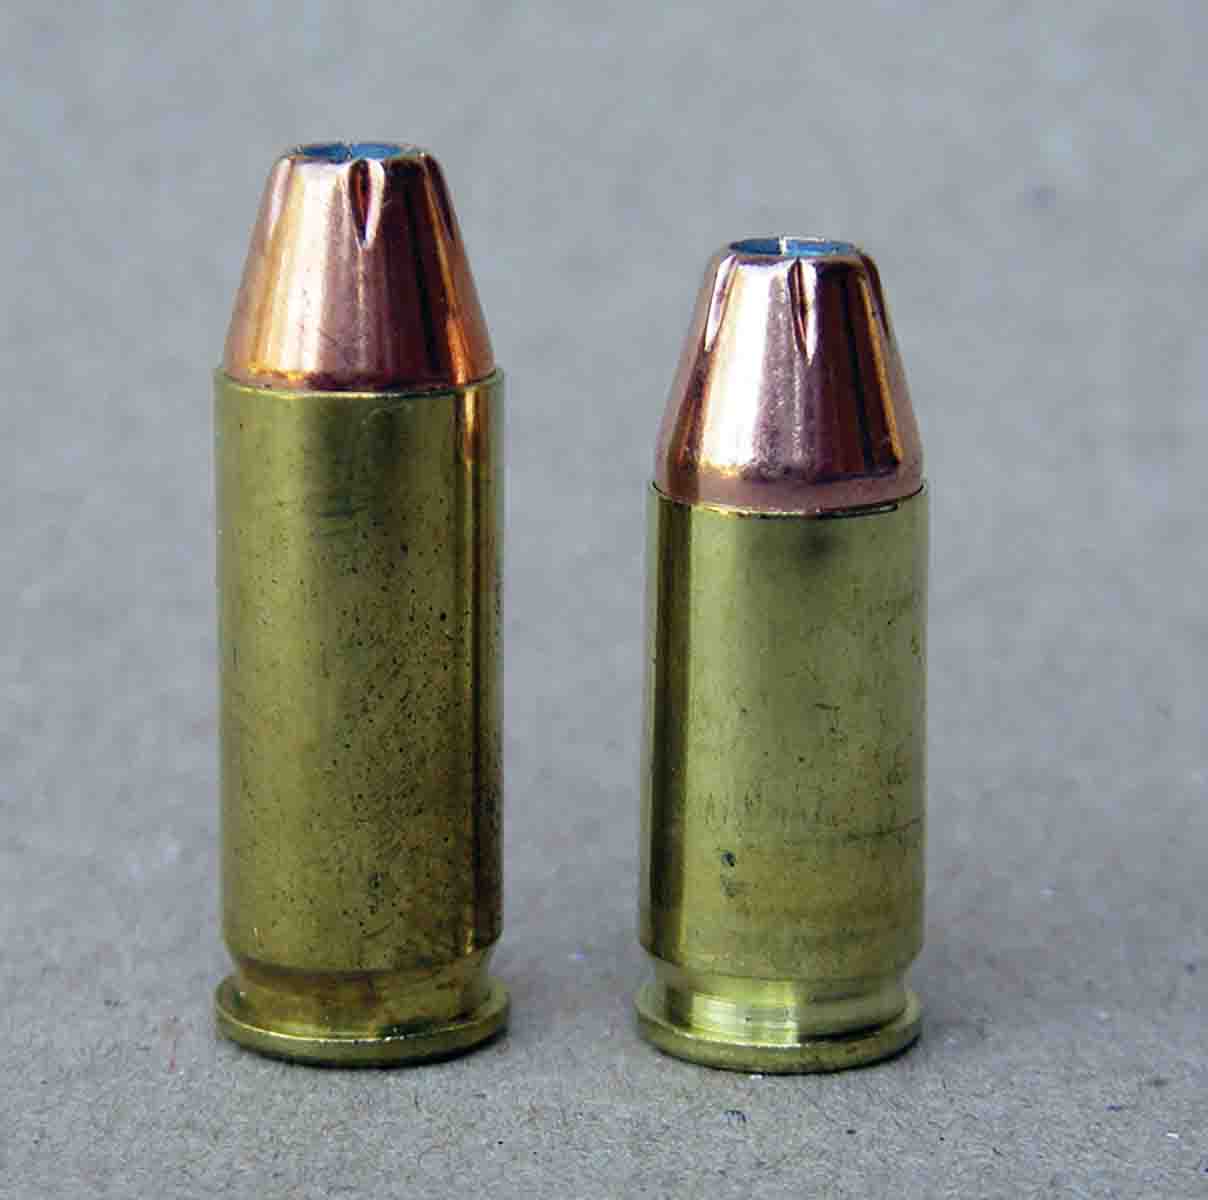 The .38 Super (left) offers a notable powder capacity increase over the 9mm Luger (right), resulting in substantial velocity increases.